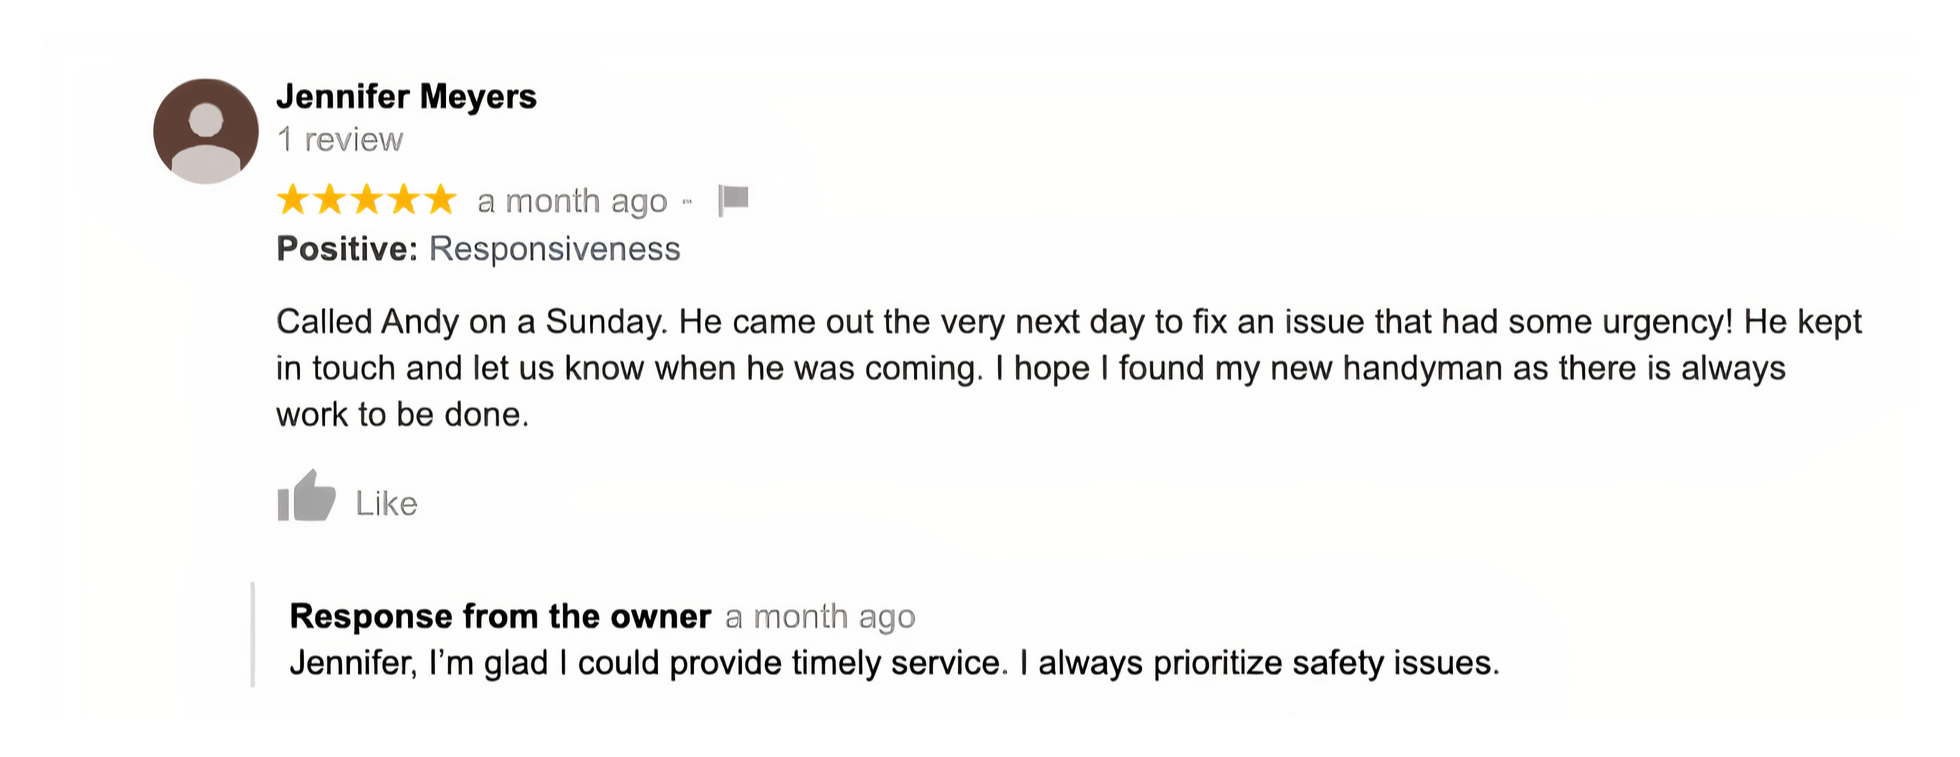 8 Powerful Examples of How to Respond to Positive Reviews PromoRepublic